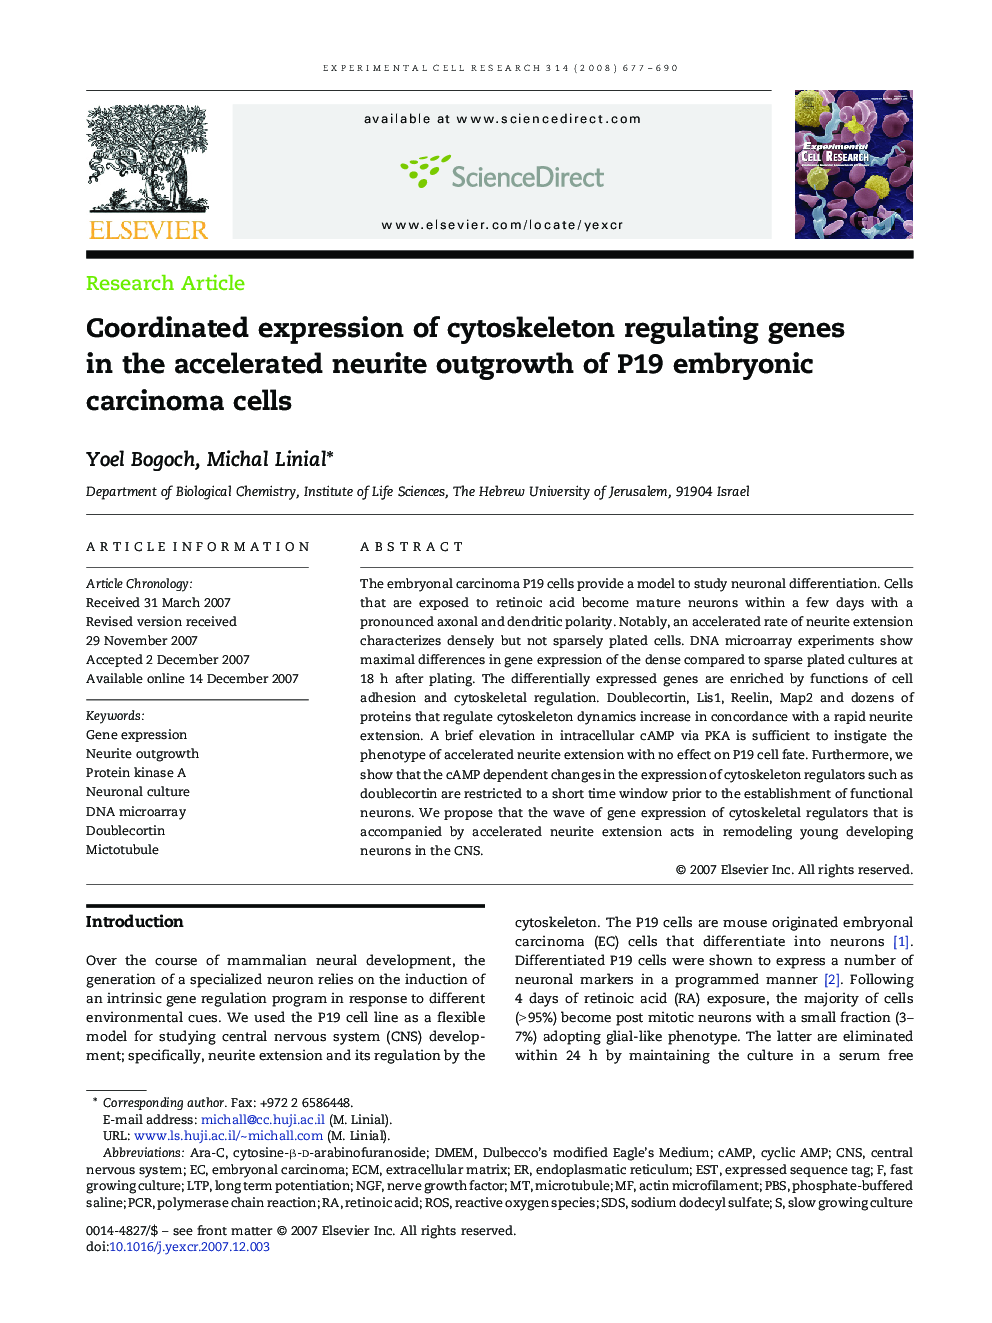 Coordinated expression of cytoskeleton regulating genes in the accelerated neurite outgrowth of P19 embryonic carcinoma cells